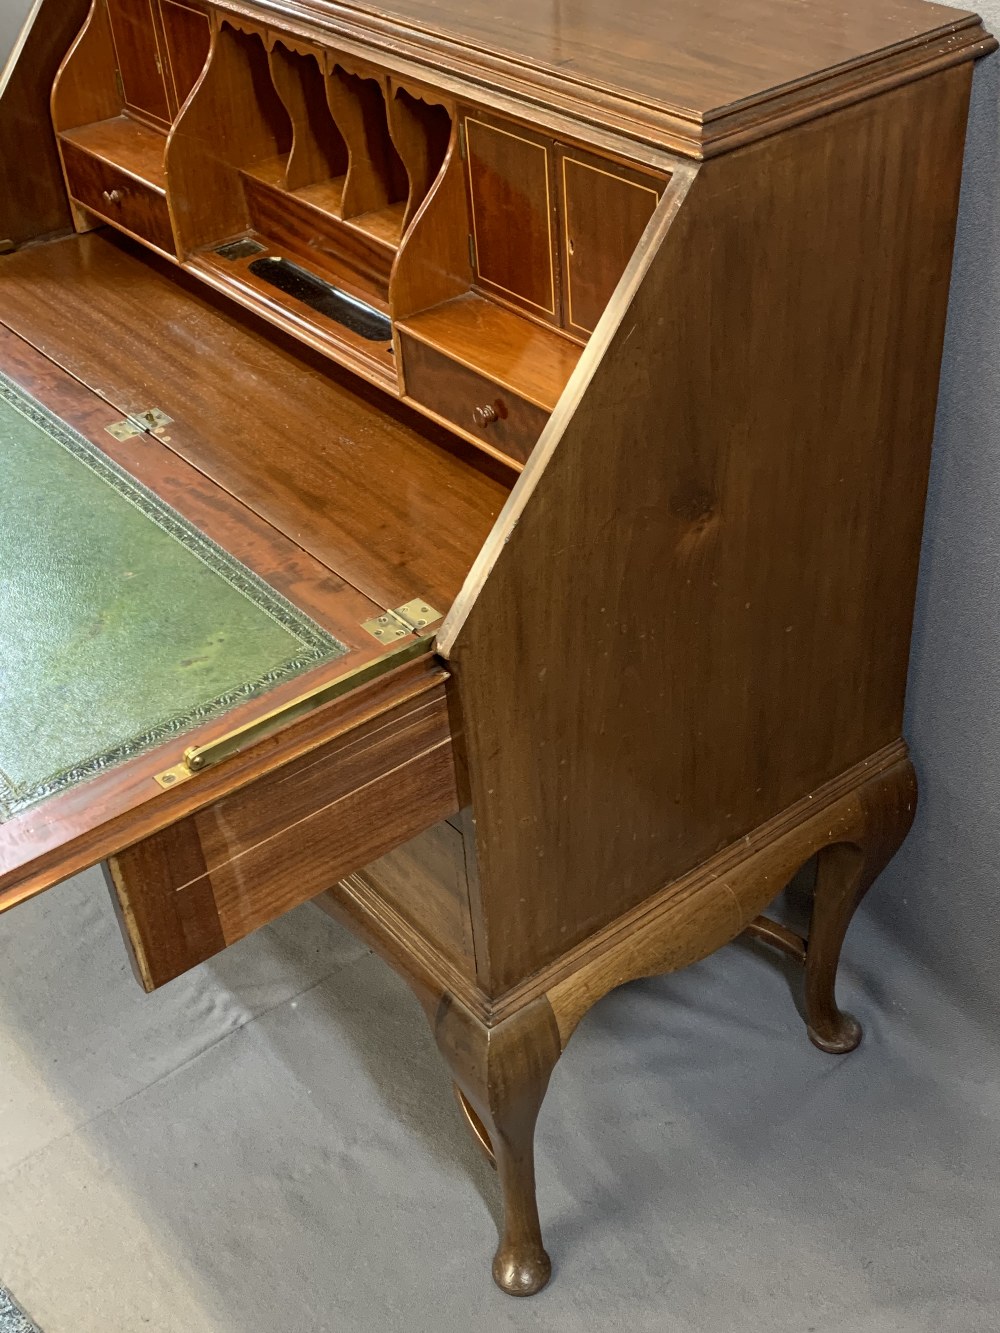 QUALITY WARINGS STAMPED STRING INLAID MAHOGANY FALL-FRONT BUREAU, the fall with boxwood inlaid - Image 3 of 8